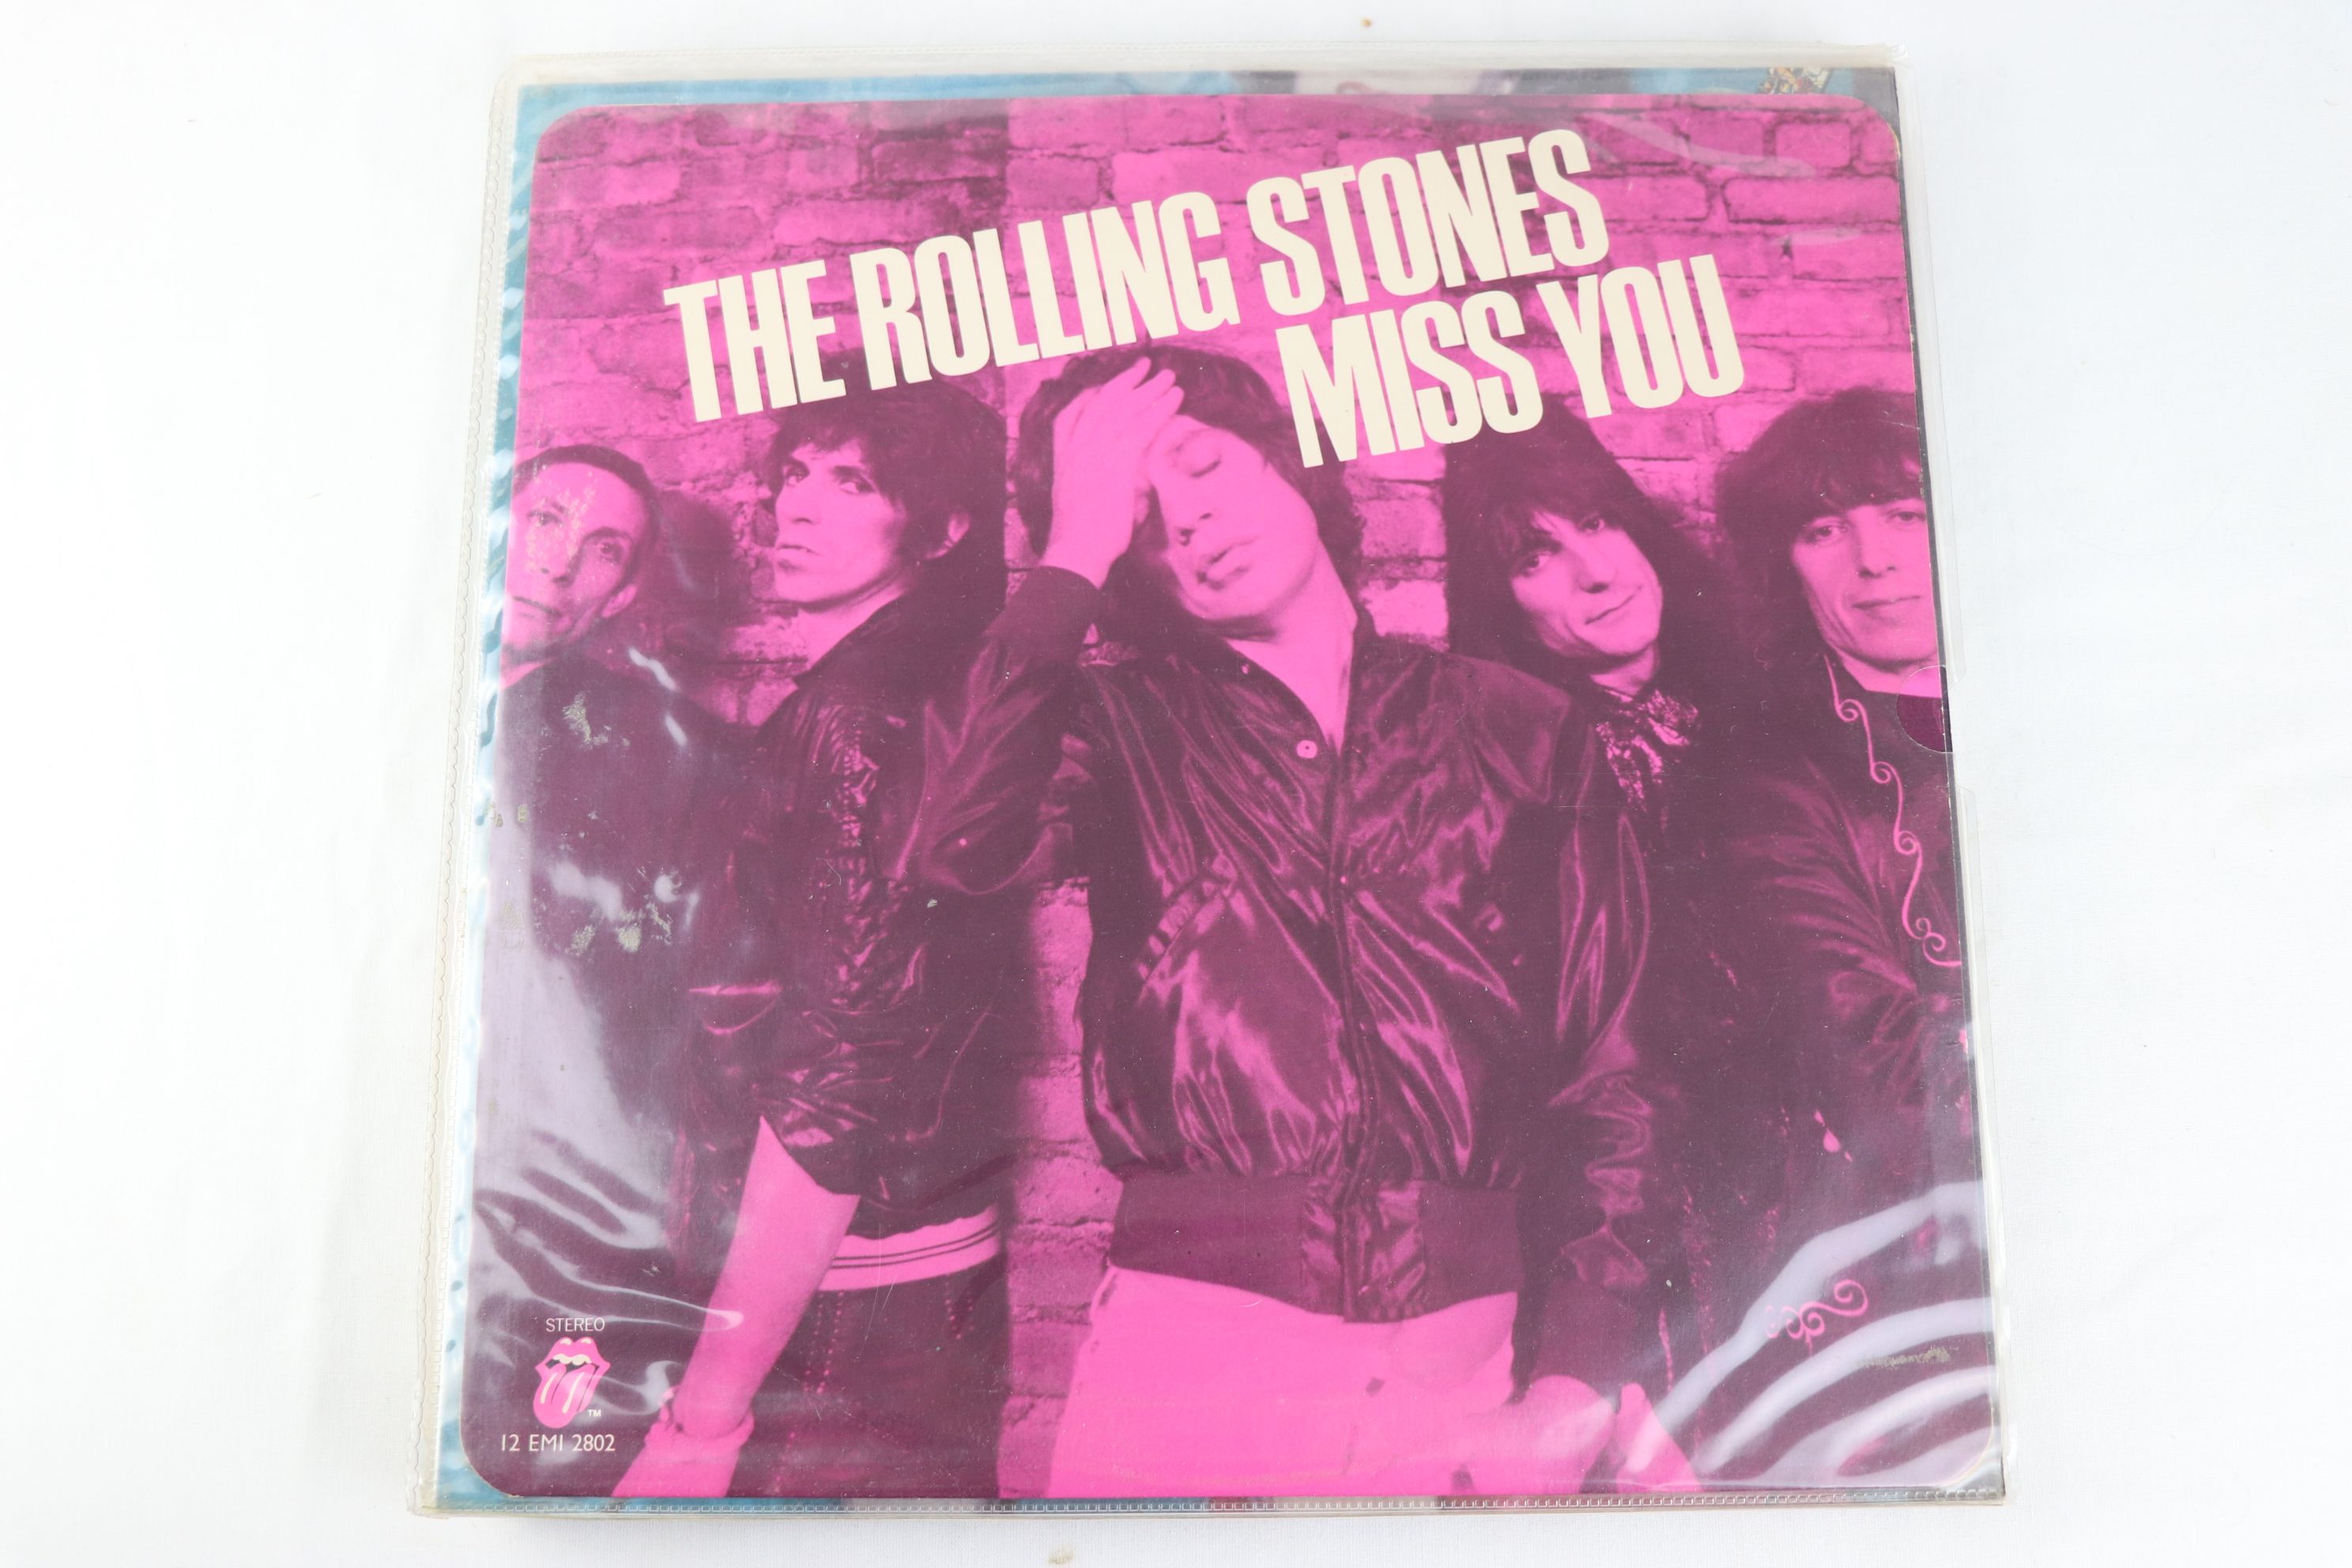 Vinyl - Five The Rolling Stones LPs plus a pink coloured Miss You 12", LPs include Rolled Gold, - Image 2 of 7